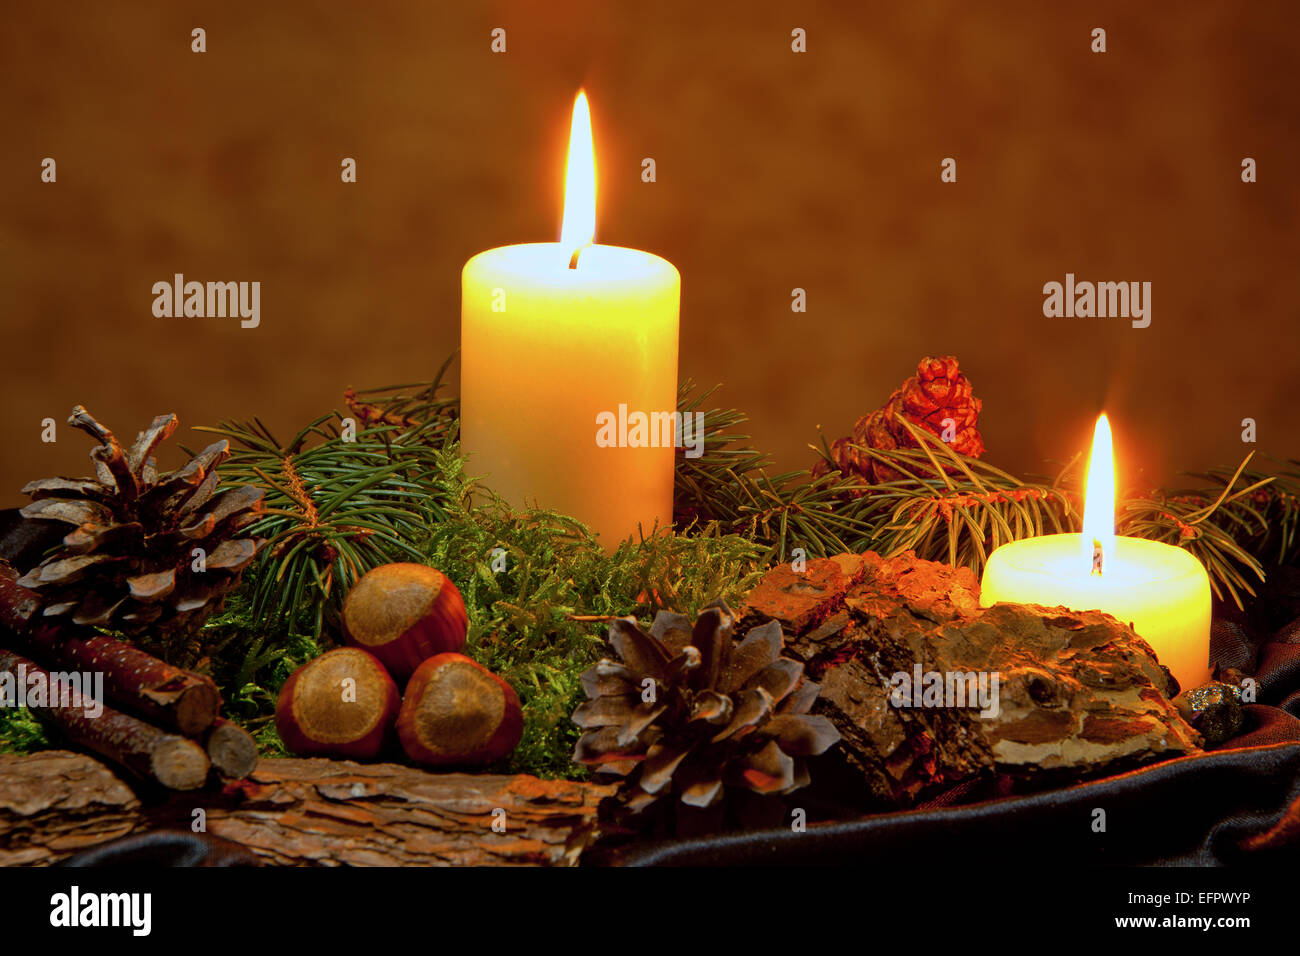 Christmas still life with candlelight Stock Photo